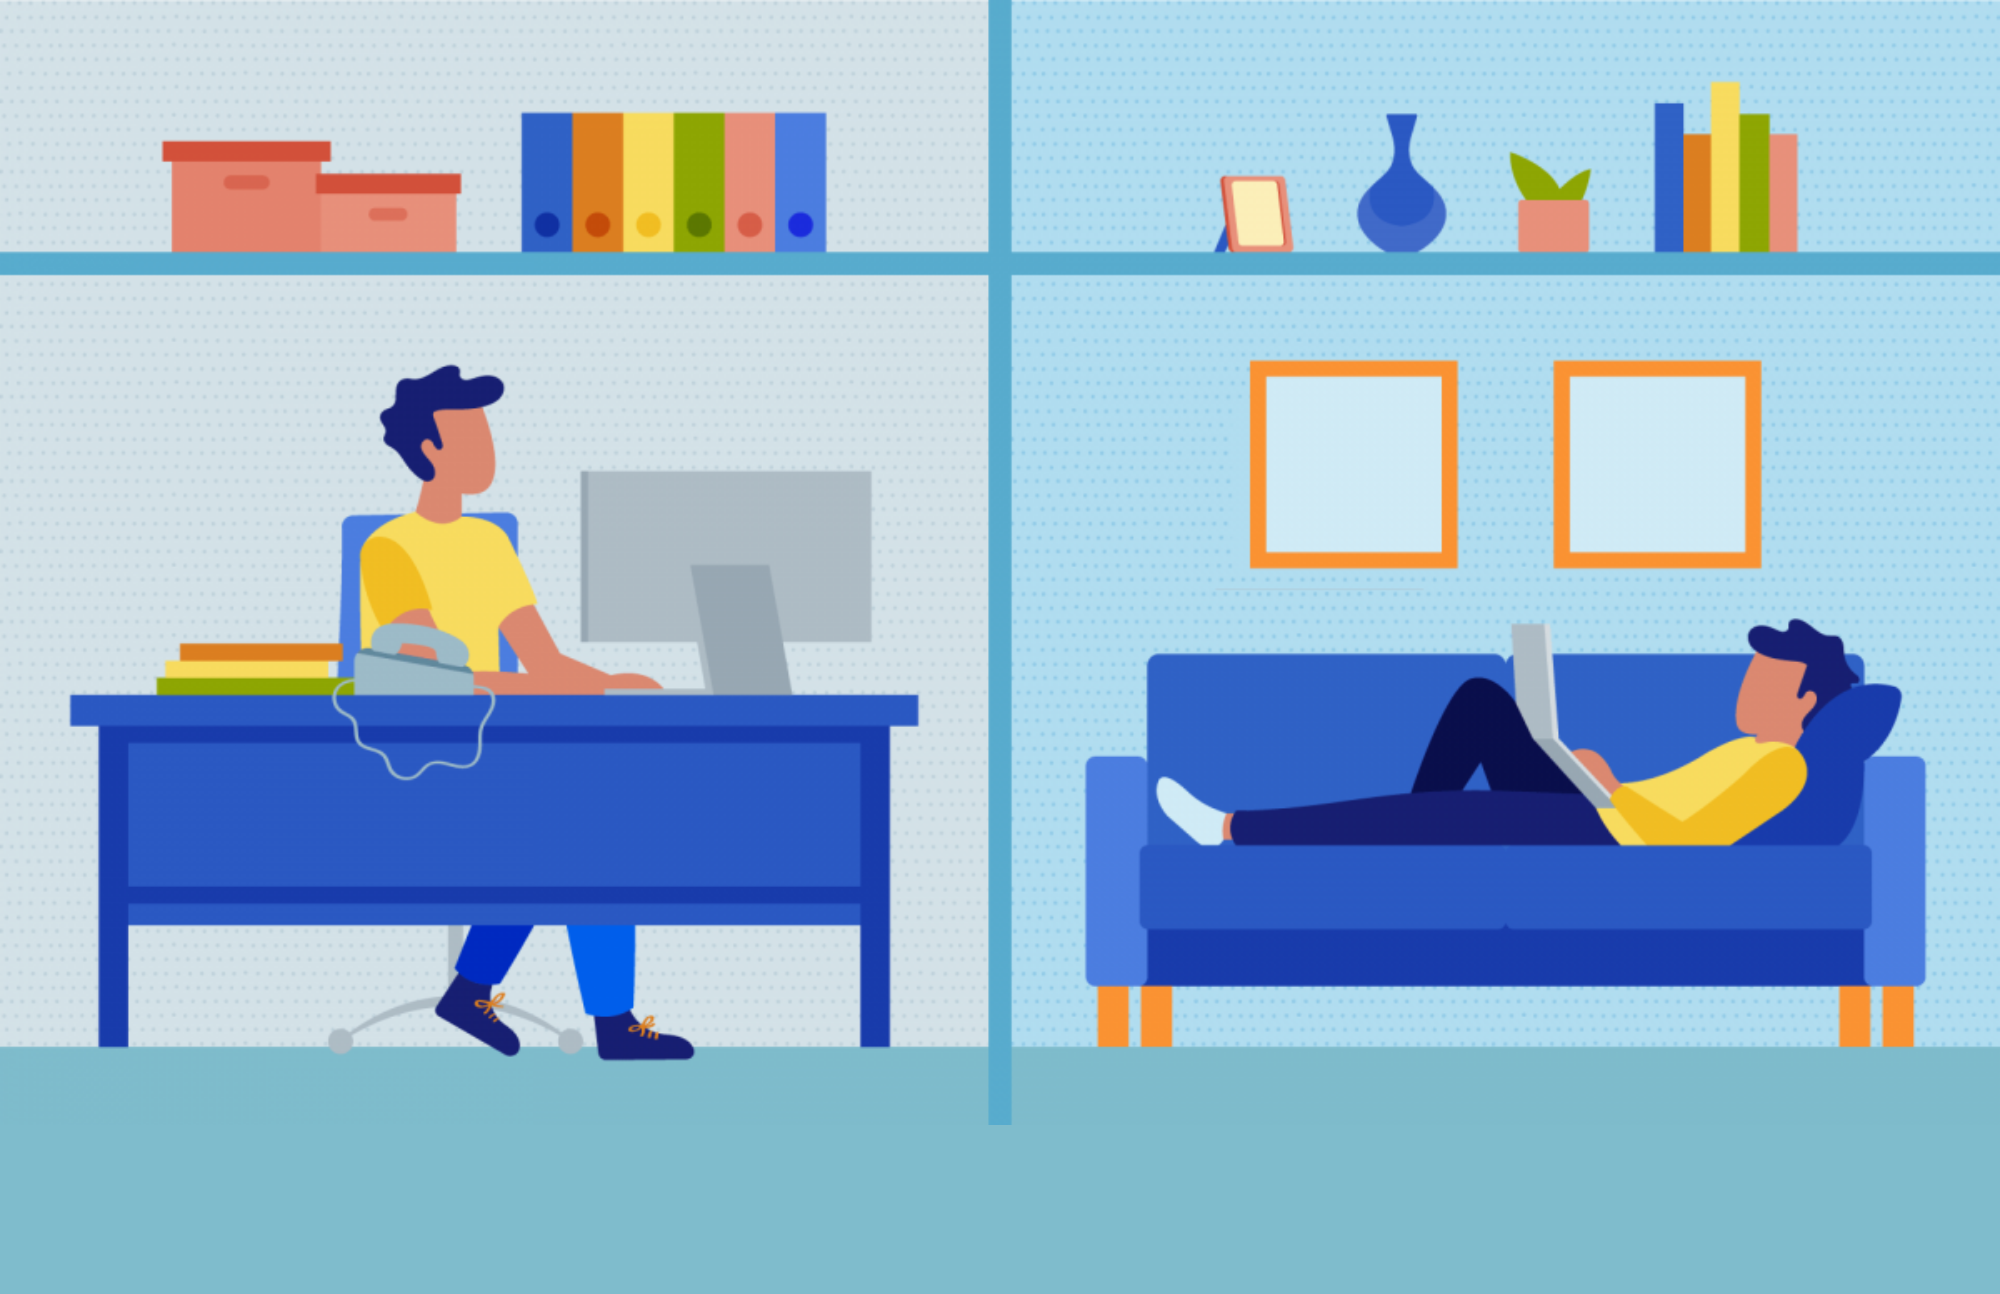 On the left, a man working at home, and on the right, the same person laying on a sofa while continuing to work.